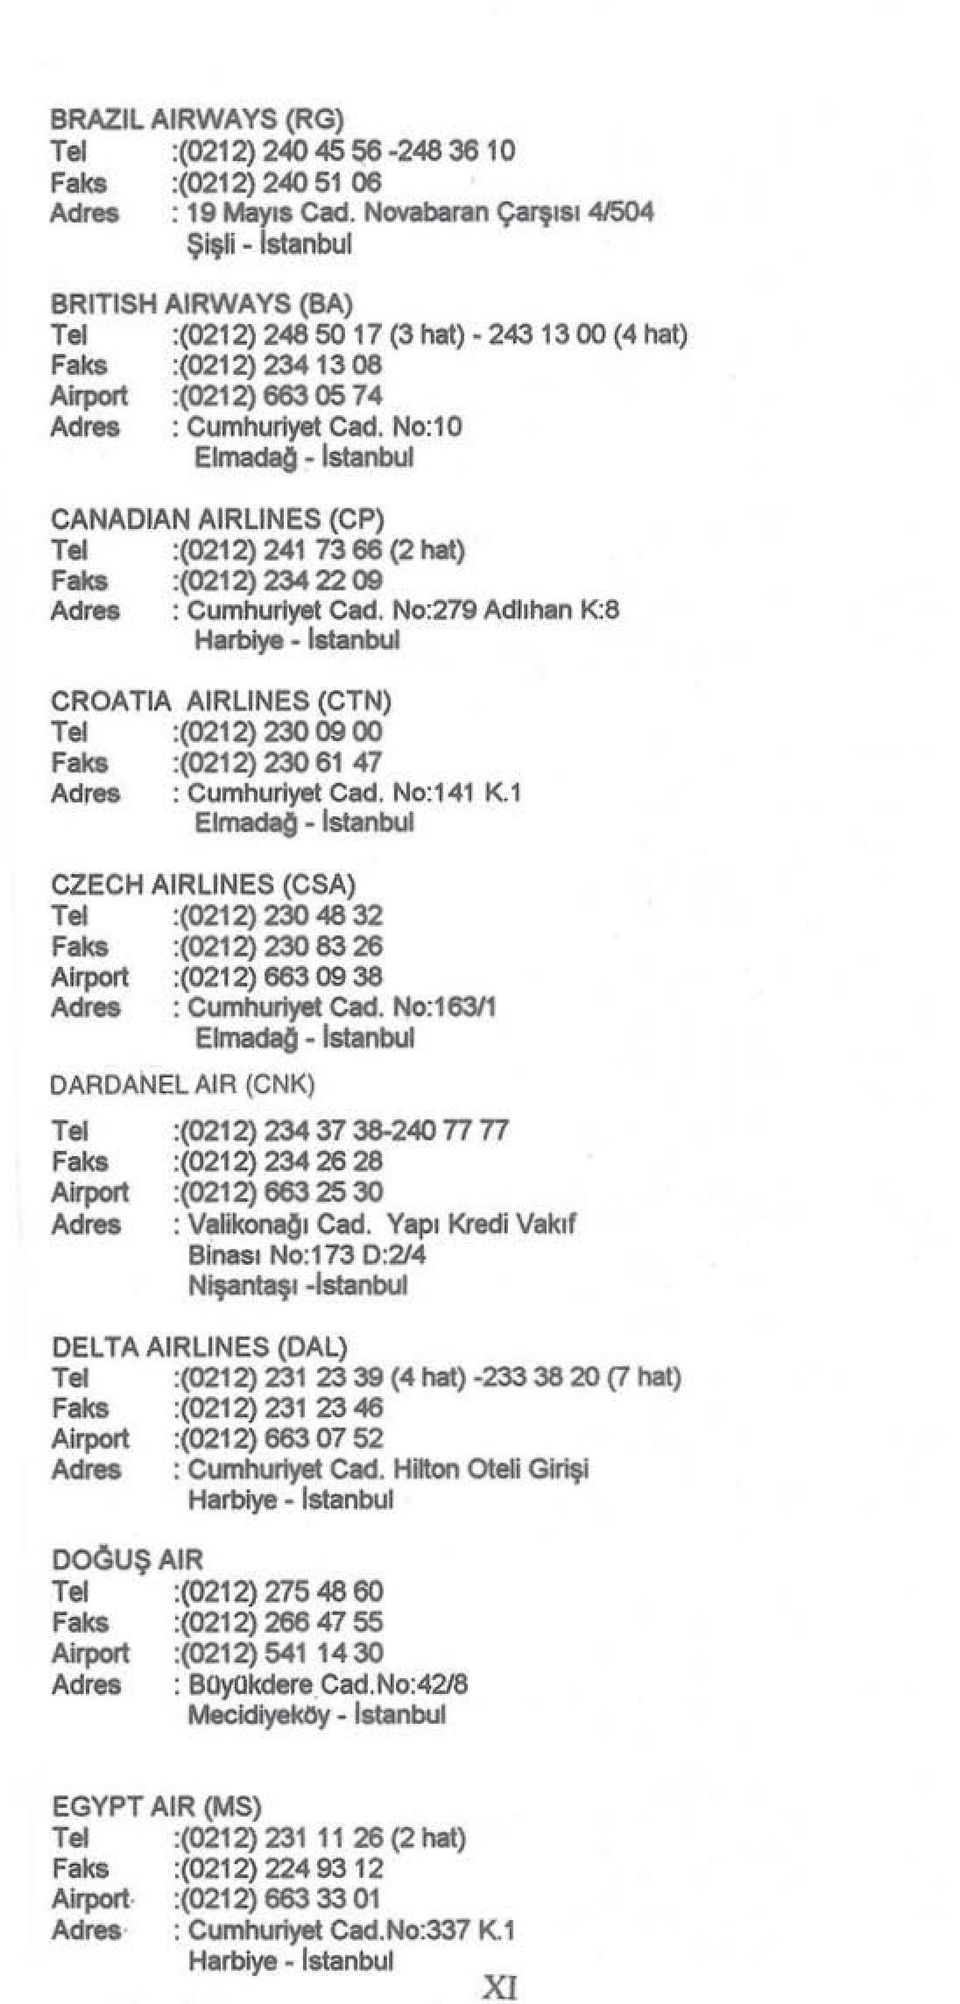 No:10 ElmadaO - Istanbul CANAOlAN AIRLINES (CP) Tel :(0212) 241 73 66 (2 hat) Faks :(0212) 234 22 09 Adres : Cumhuriyet Cad.